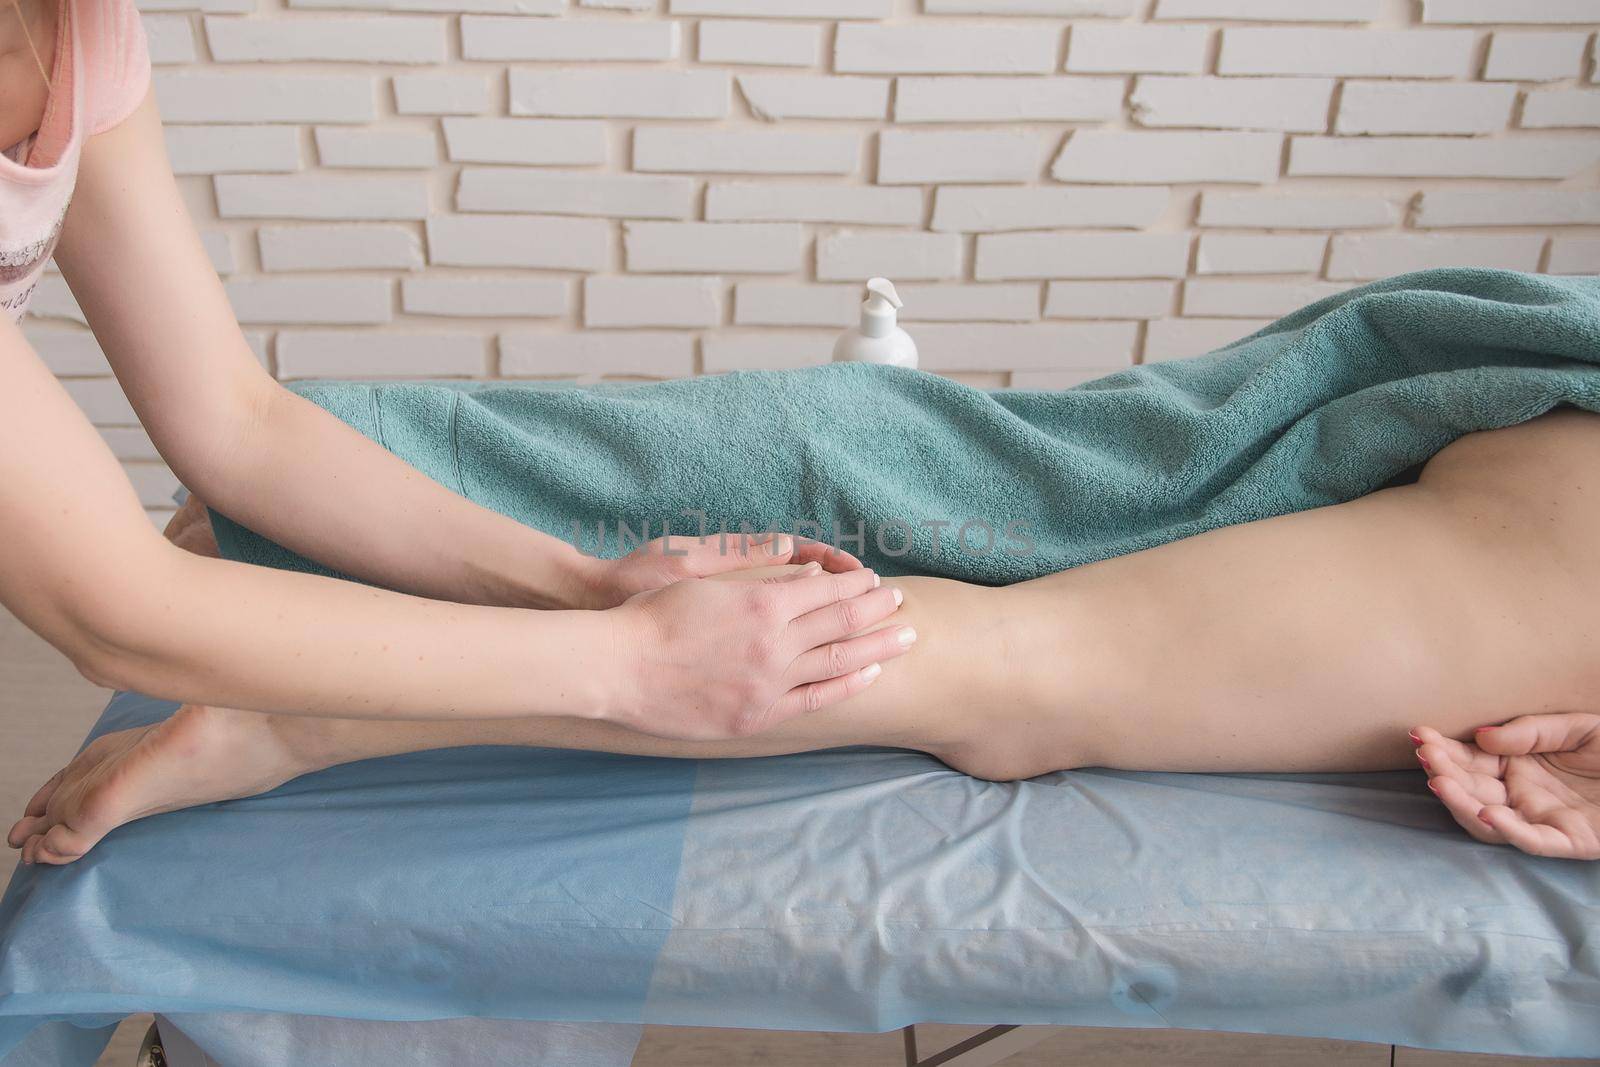 anti-cellulite foot massage in the spa salon makes the girl a cosmetology